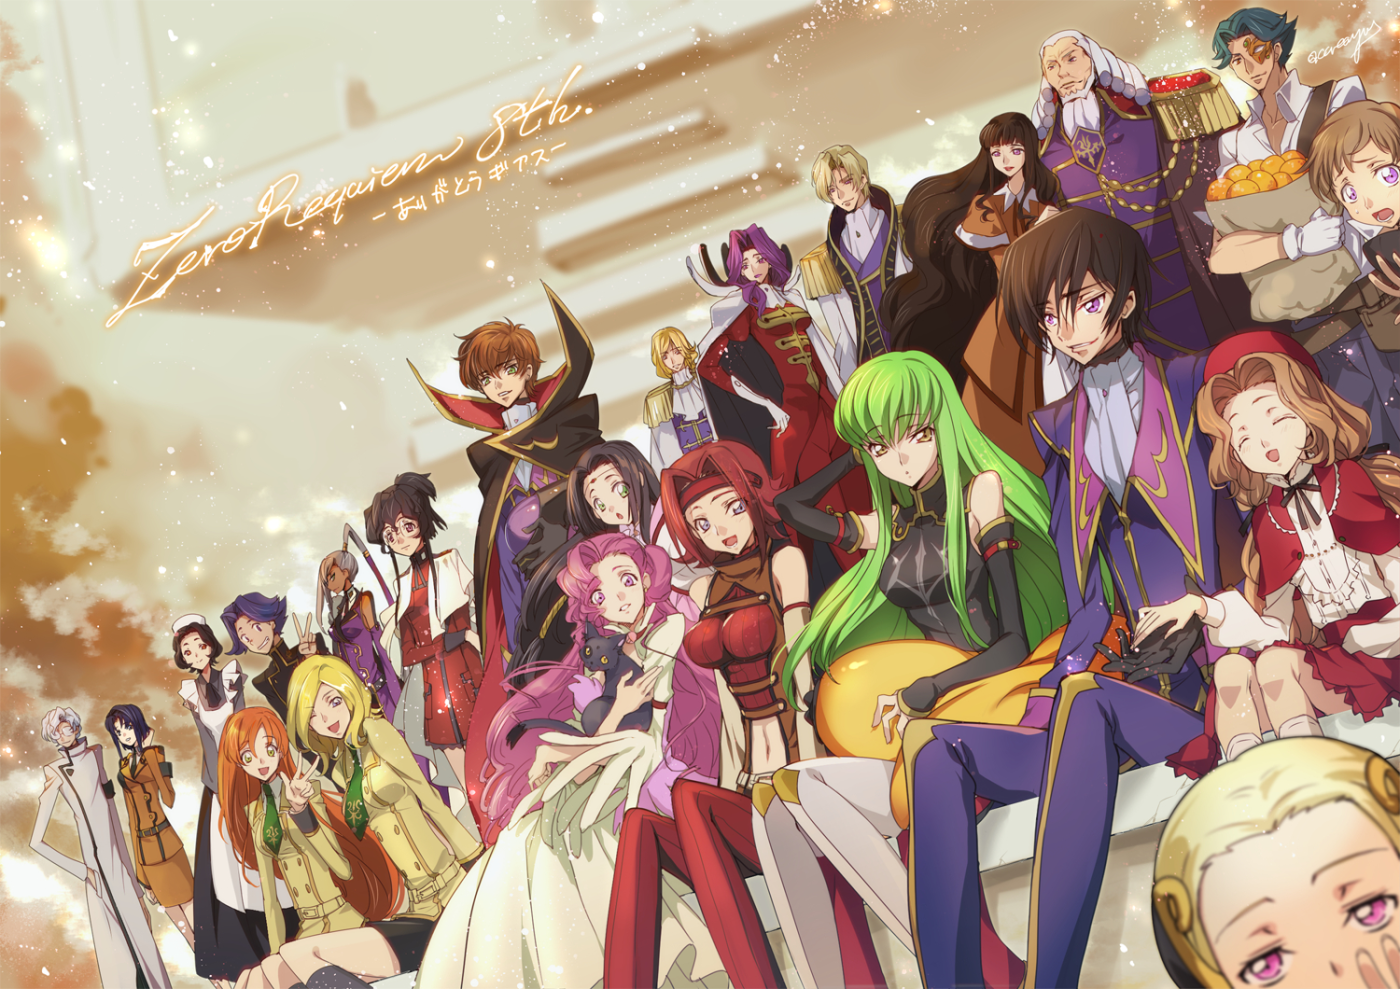 Code Geass: Lelouch of the Re;surrection Review: A Mixed Bag Just Like the  Show. – THE REVIEW MONSTER